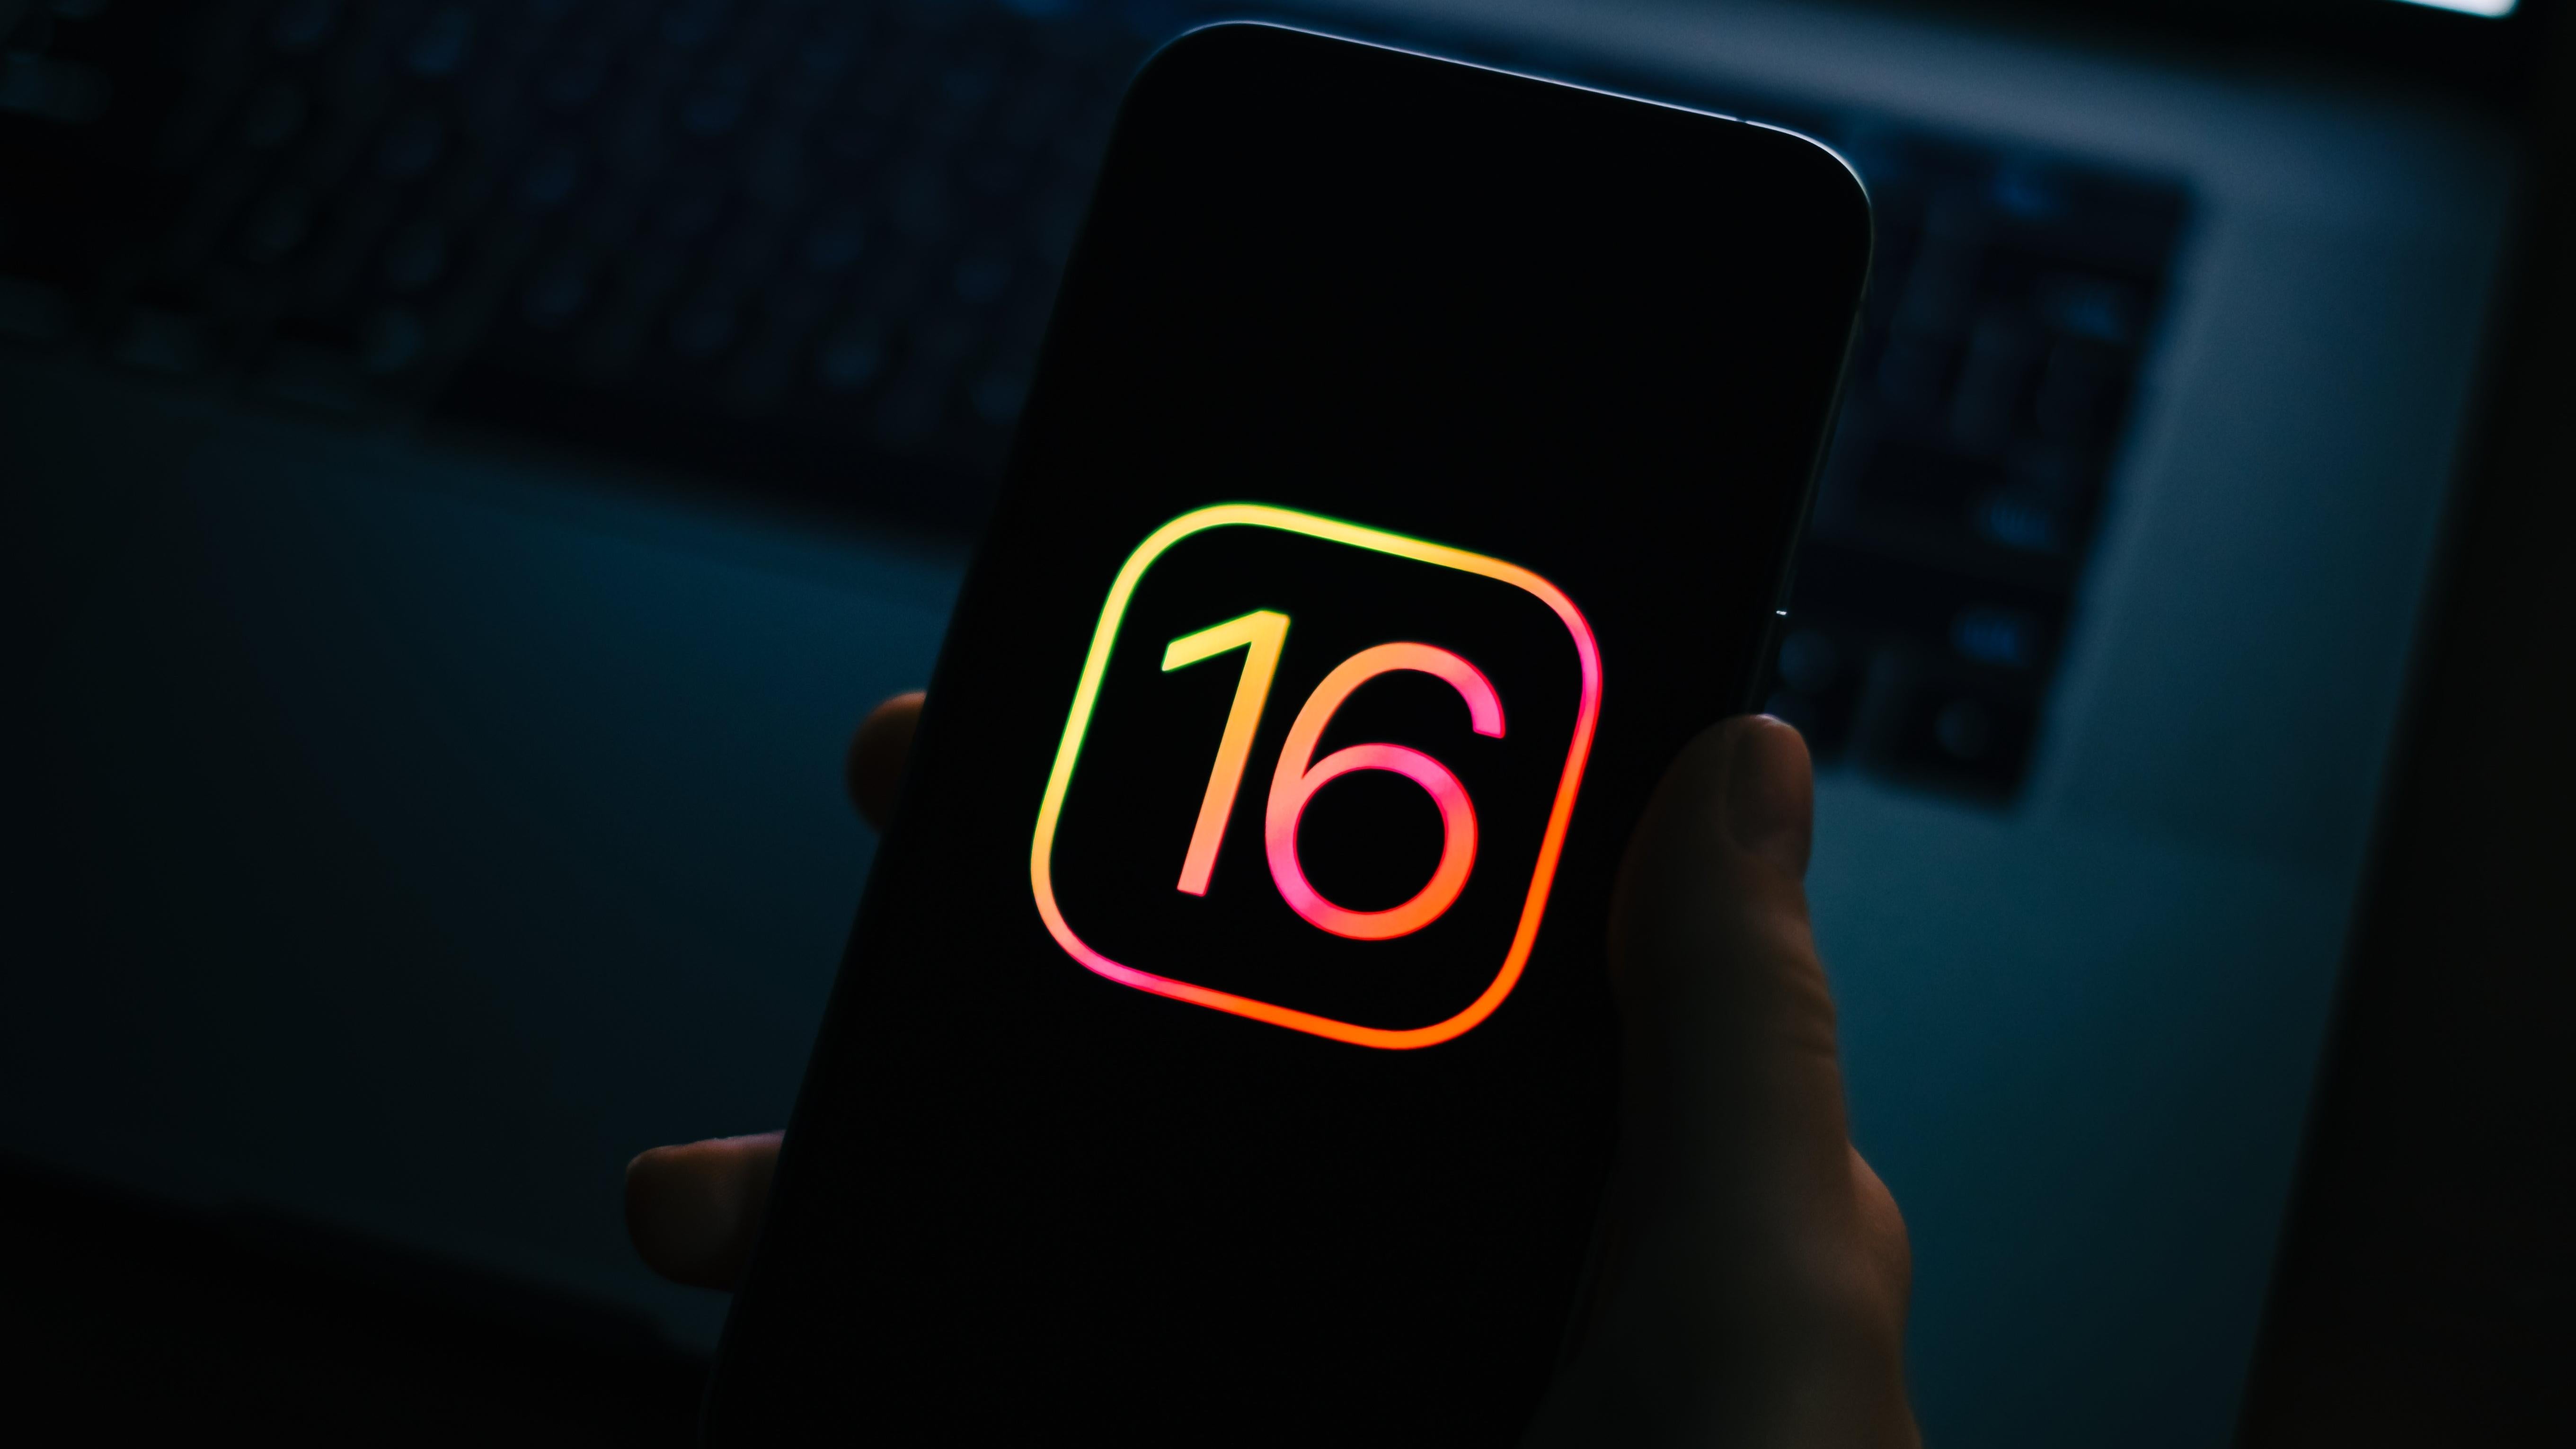 iOS 16: Best Features Coming To iPhone - AppleToolBox